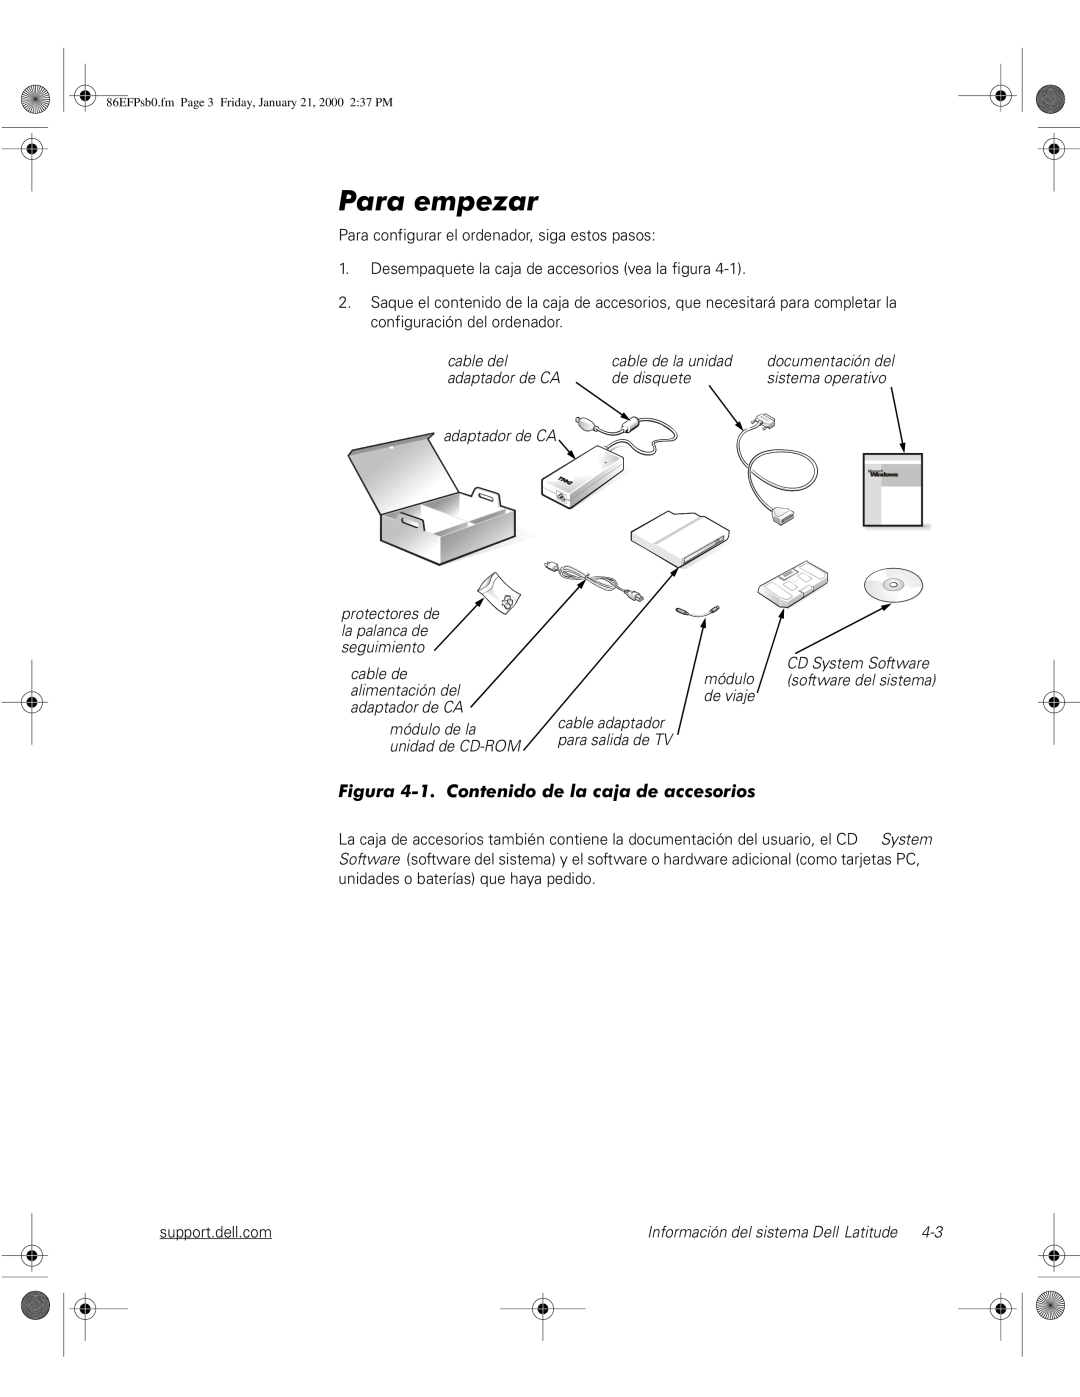 Dell PPX manual 3DUDHPSHDU, 86EFPsb0.fm Page 3 Friday, January 21, 2000 237 PM 